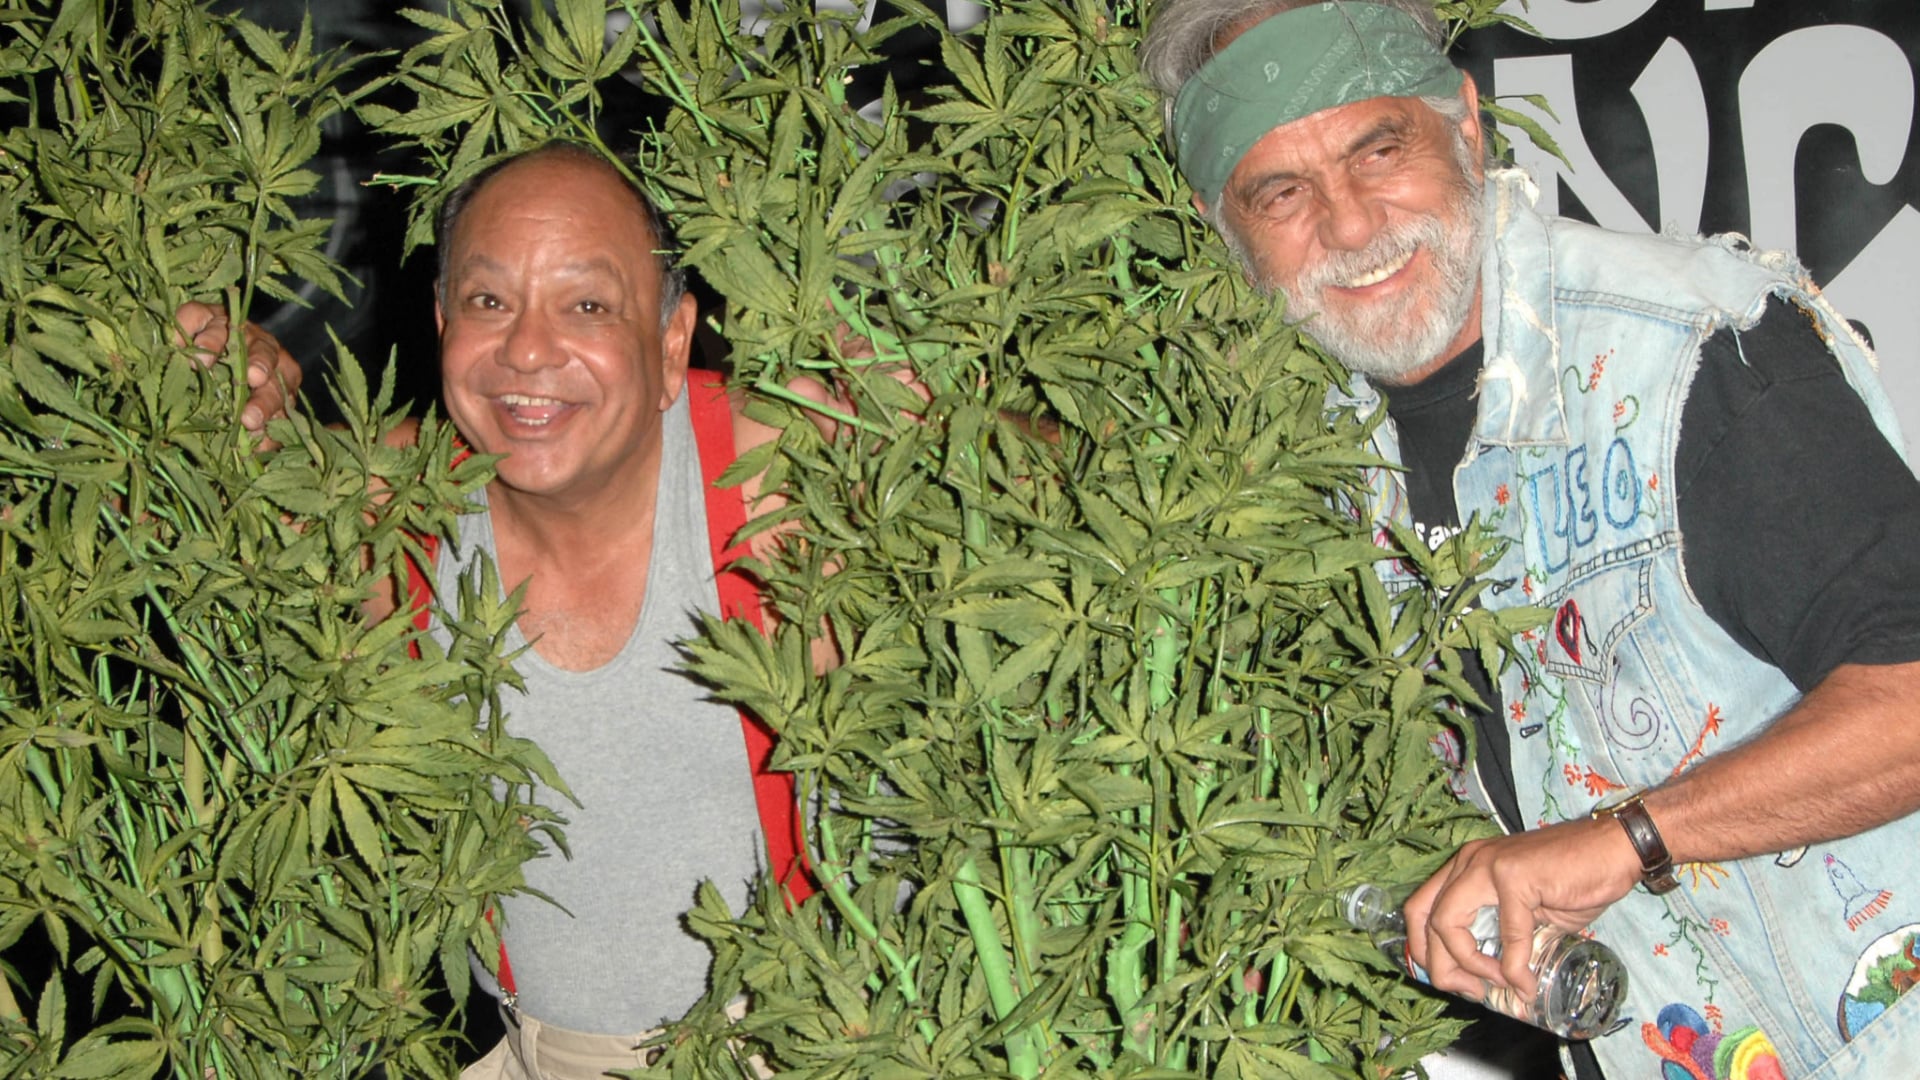 Cannabinthusiast | Cheech & Chong: From Funny to Lame to Essential - Cheech Marin and Tommy Chong